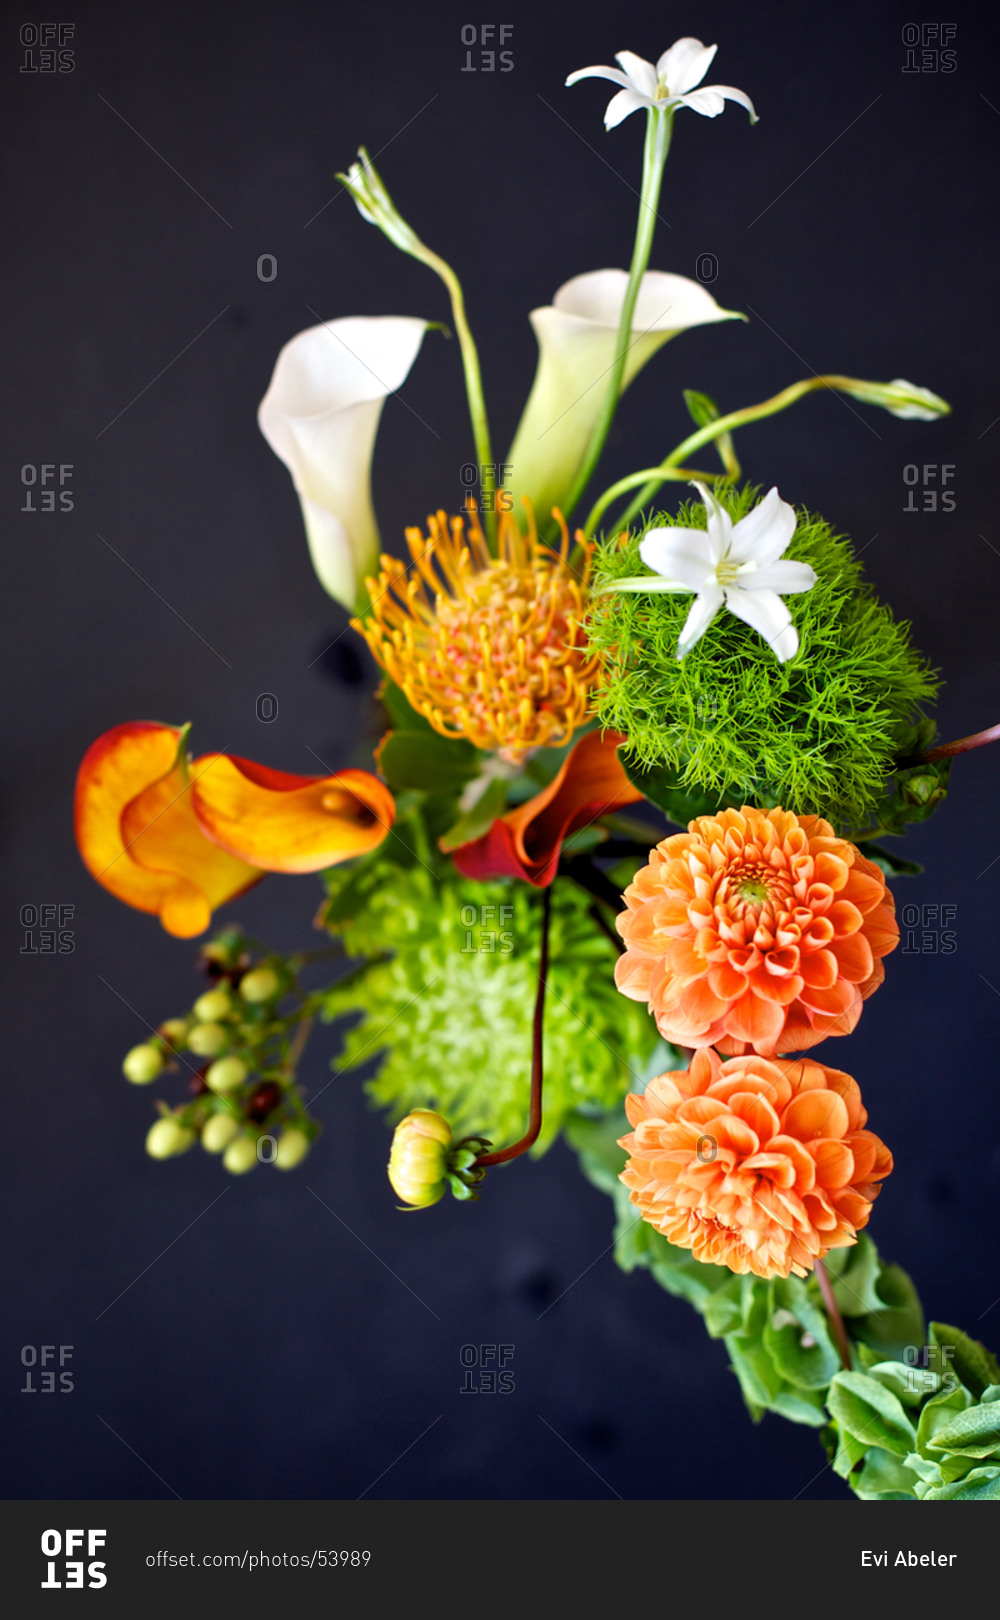 Bouquet of flowers on black surface